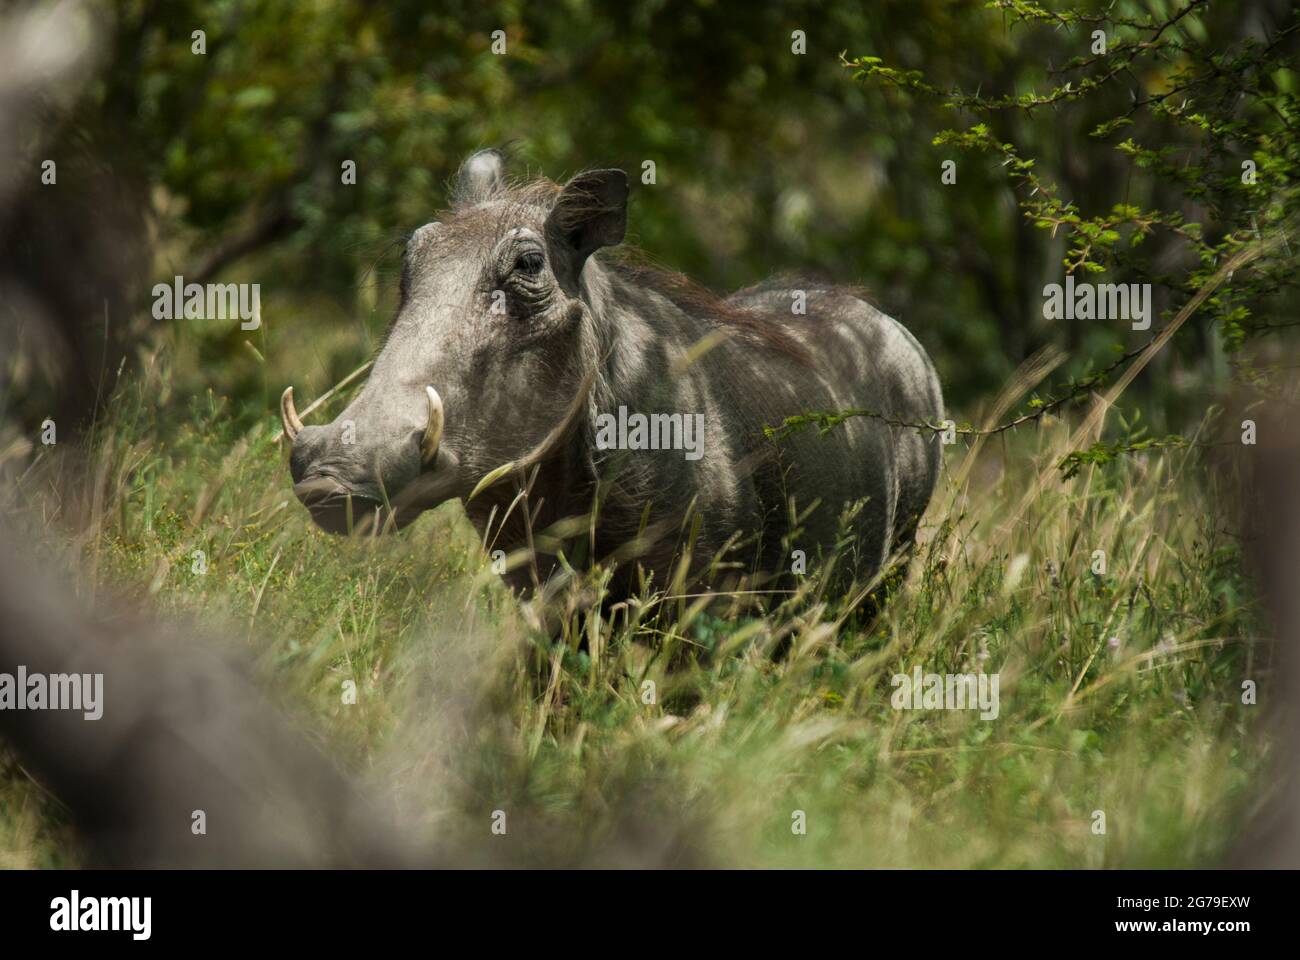 Warthog (Phacochoerus africanus) in long grass amongst trees. Near Skukuza Rest Camp, Kruger National Park, Mpumalanga Province, South Africa. Stock Photo